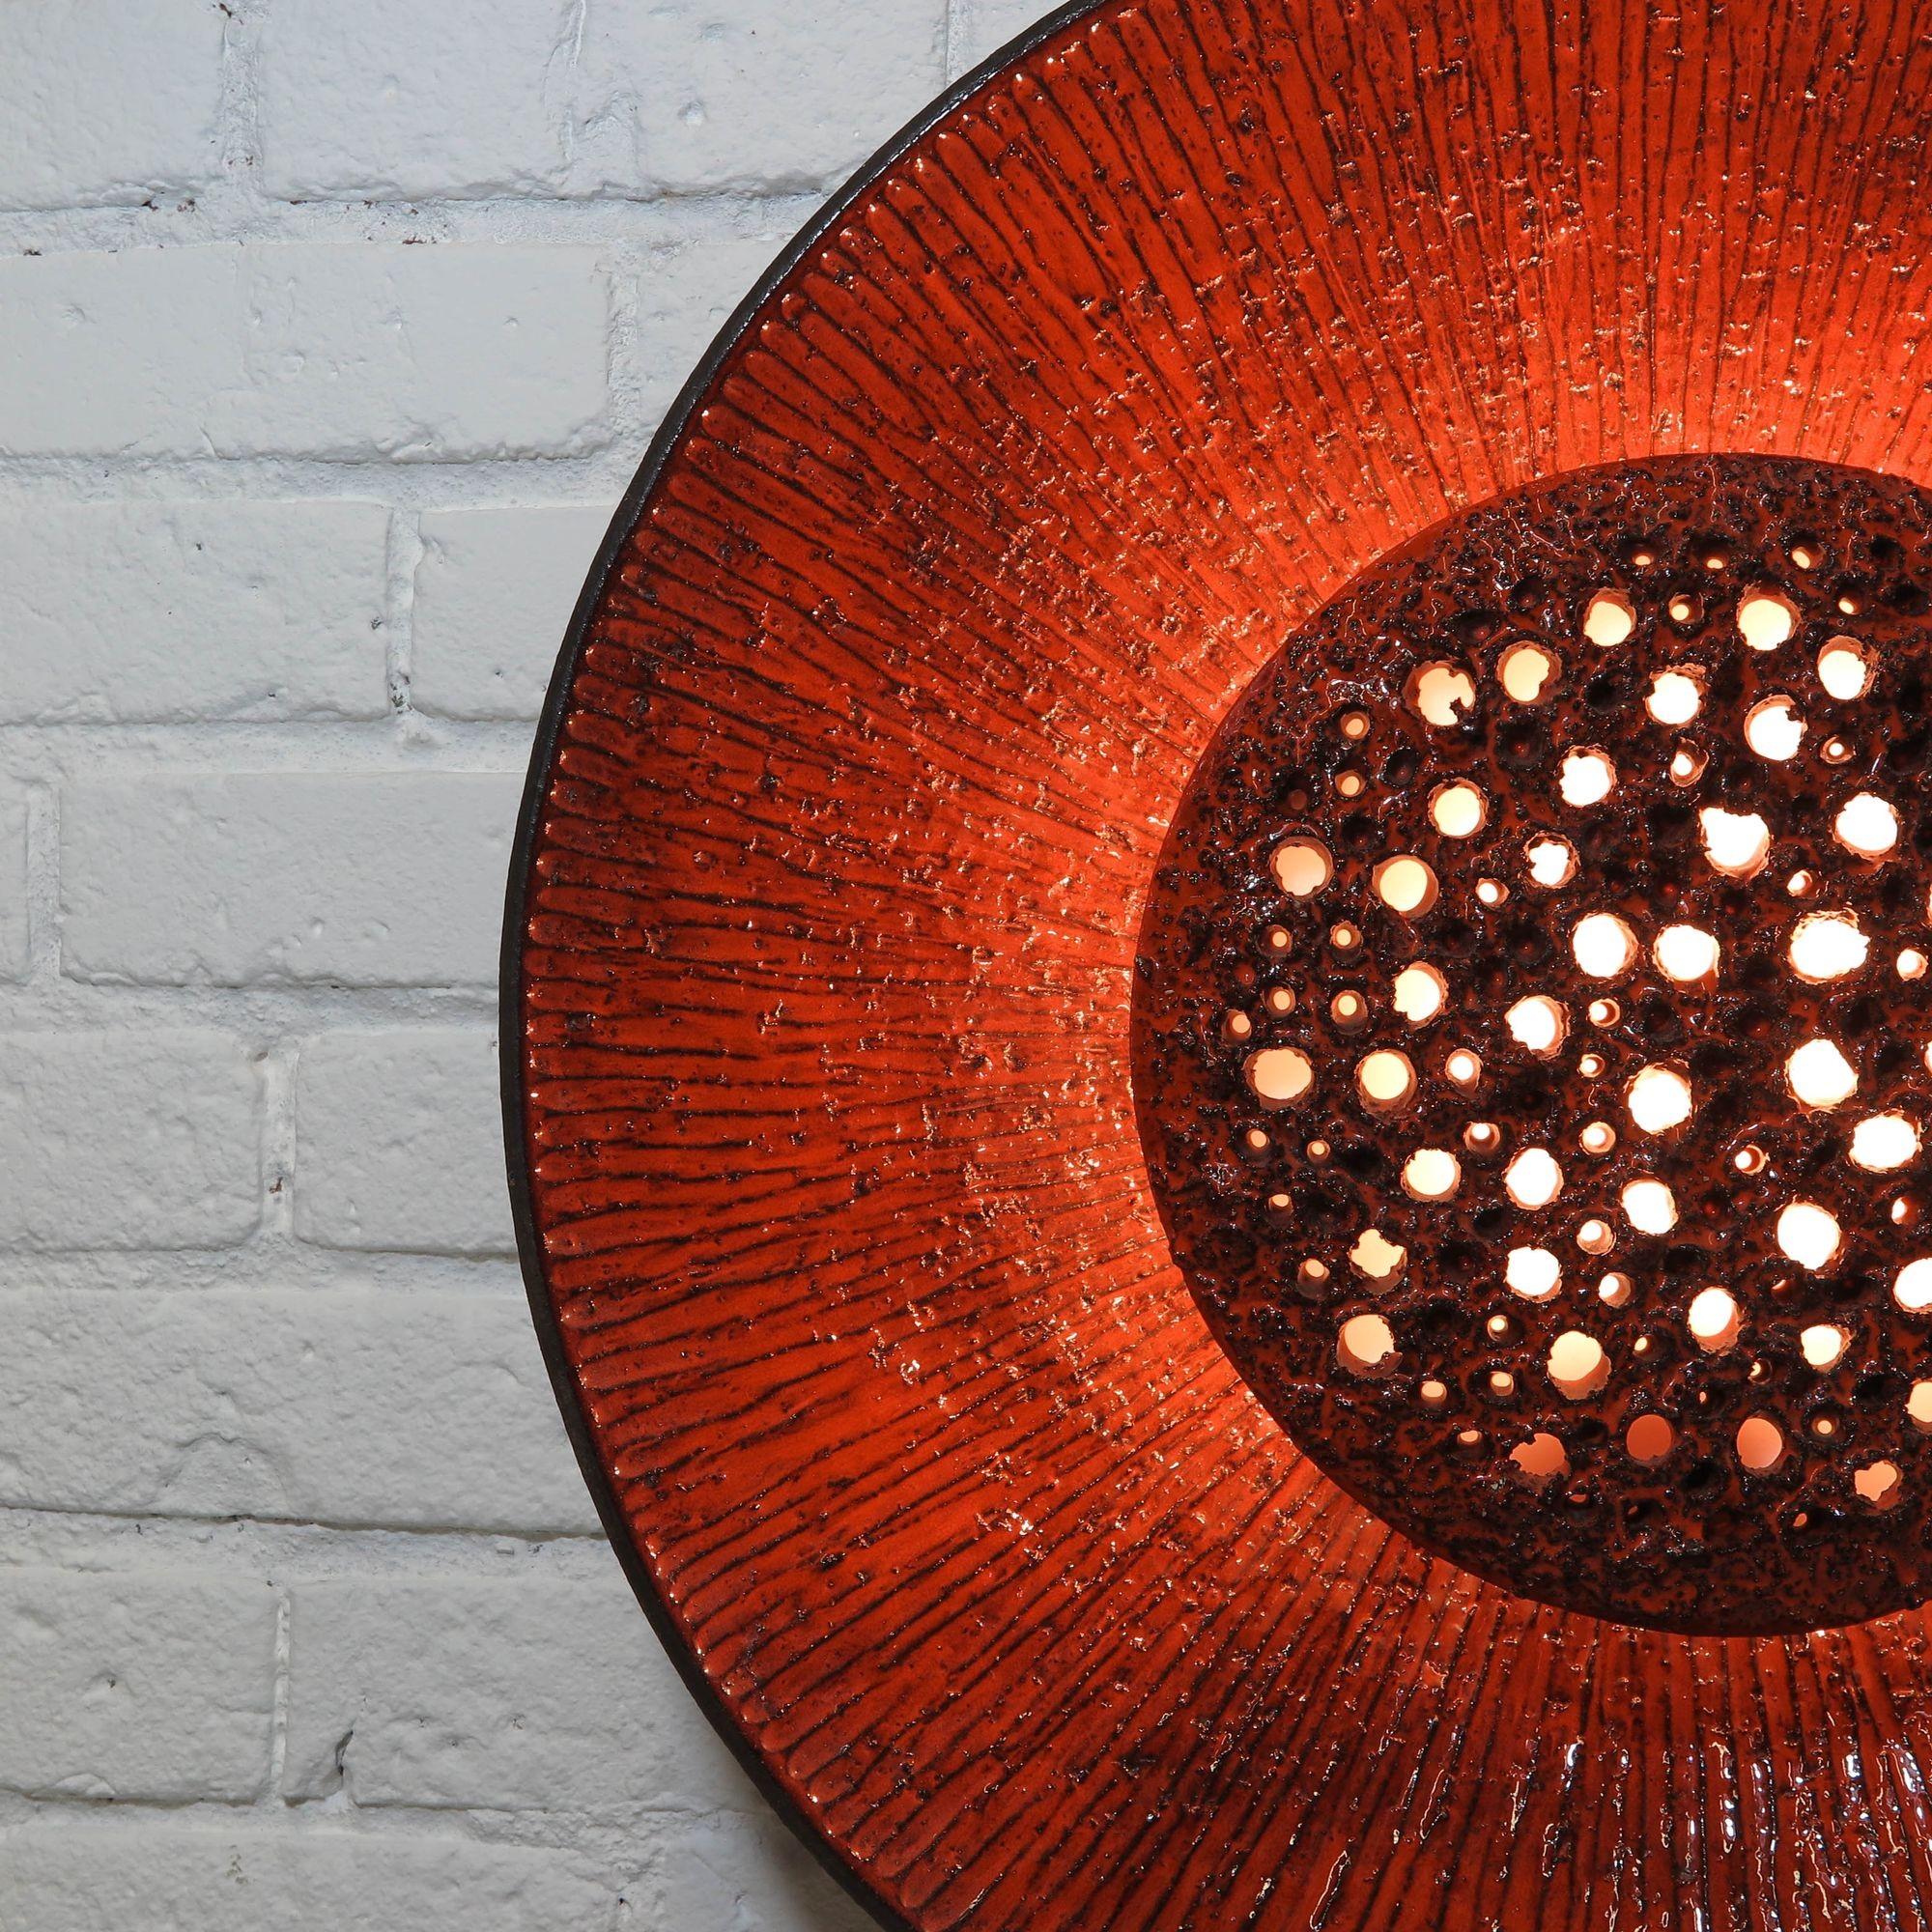 Stunning Danish ceramic wall light by Sejer Keramikfabrik, 1960s, Denmark. The light features a deep orange/red glaze over round discs which illuminates light through to create ambient 